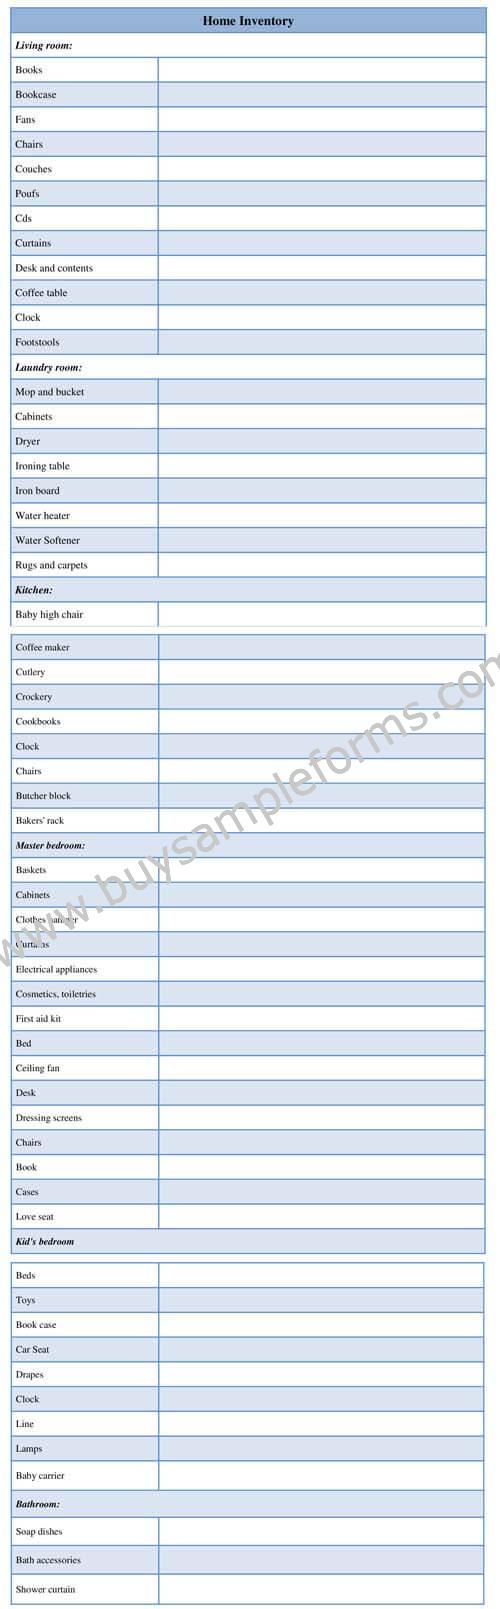 Home Inventory Form Template